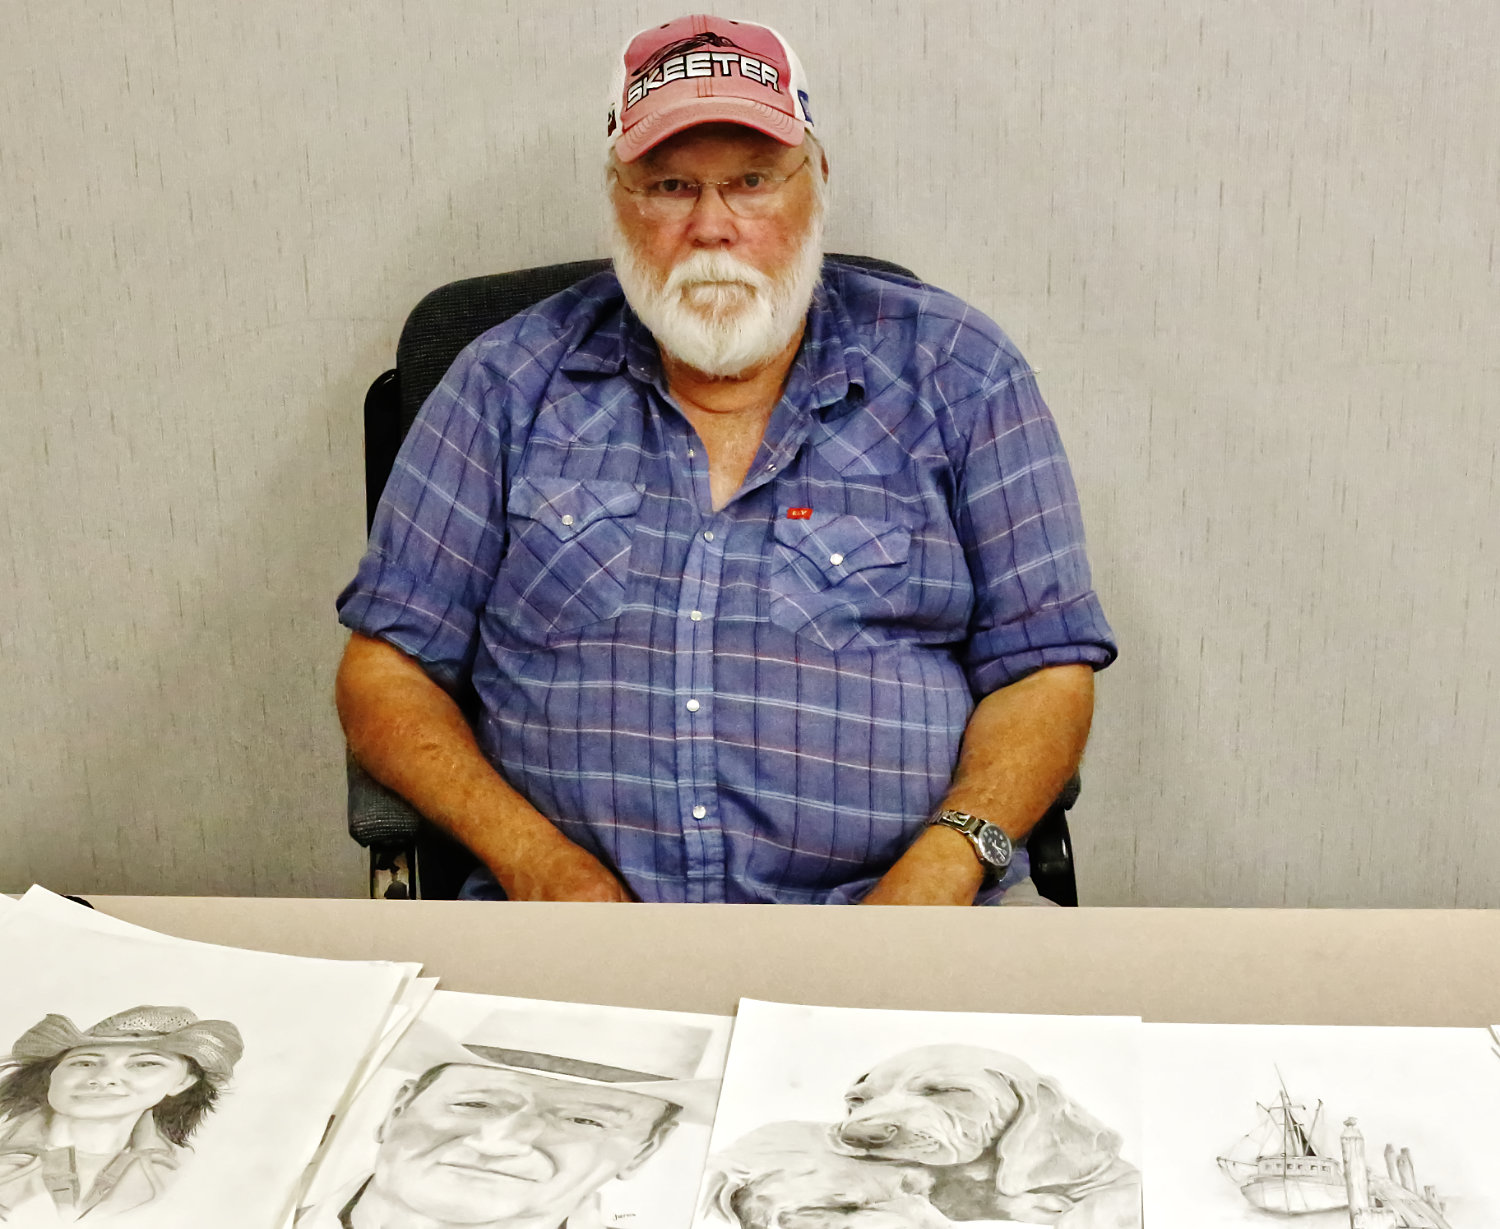 When he is not fishing, Lake Fork resident Johnny Harris produces amazingly life-like pencil sketches.